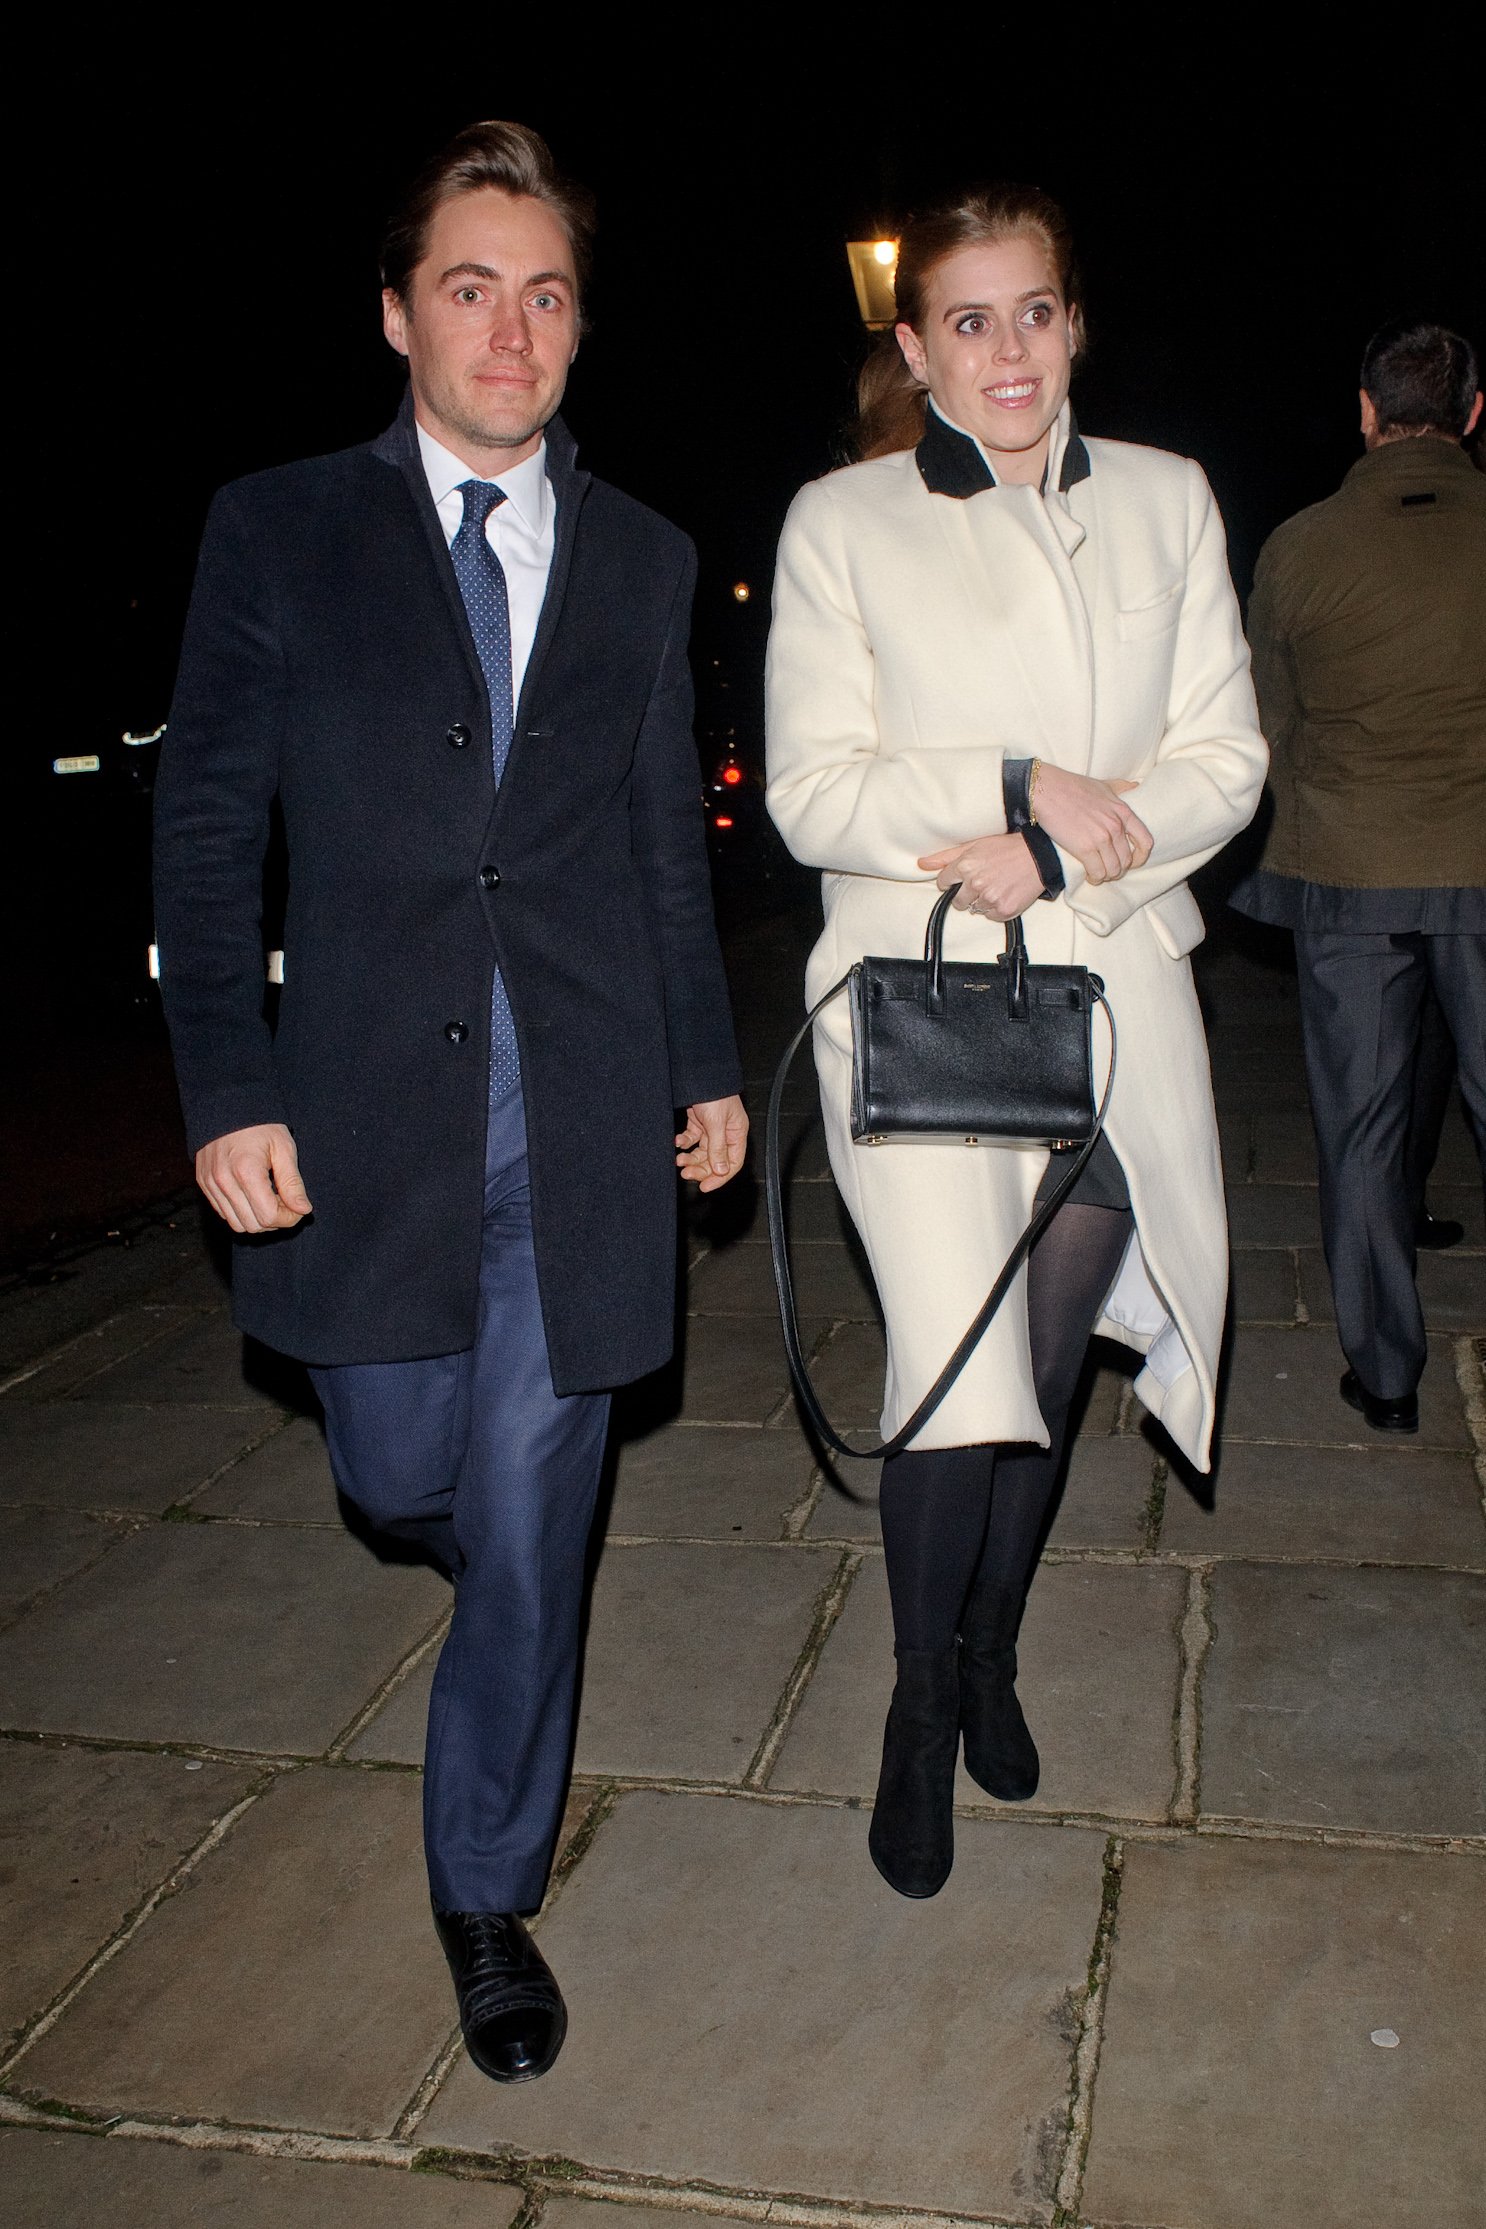 Princess Beatrice (R) and Edoardo Mapelli Mozzi seen attending Evgeny Lebedev's Christmas Party at a private North London residence on December 13, 2019 | Photo: Getty Images